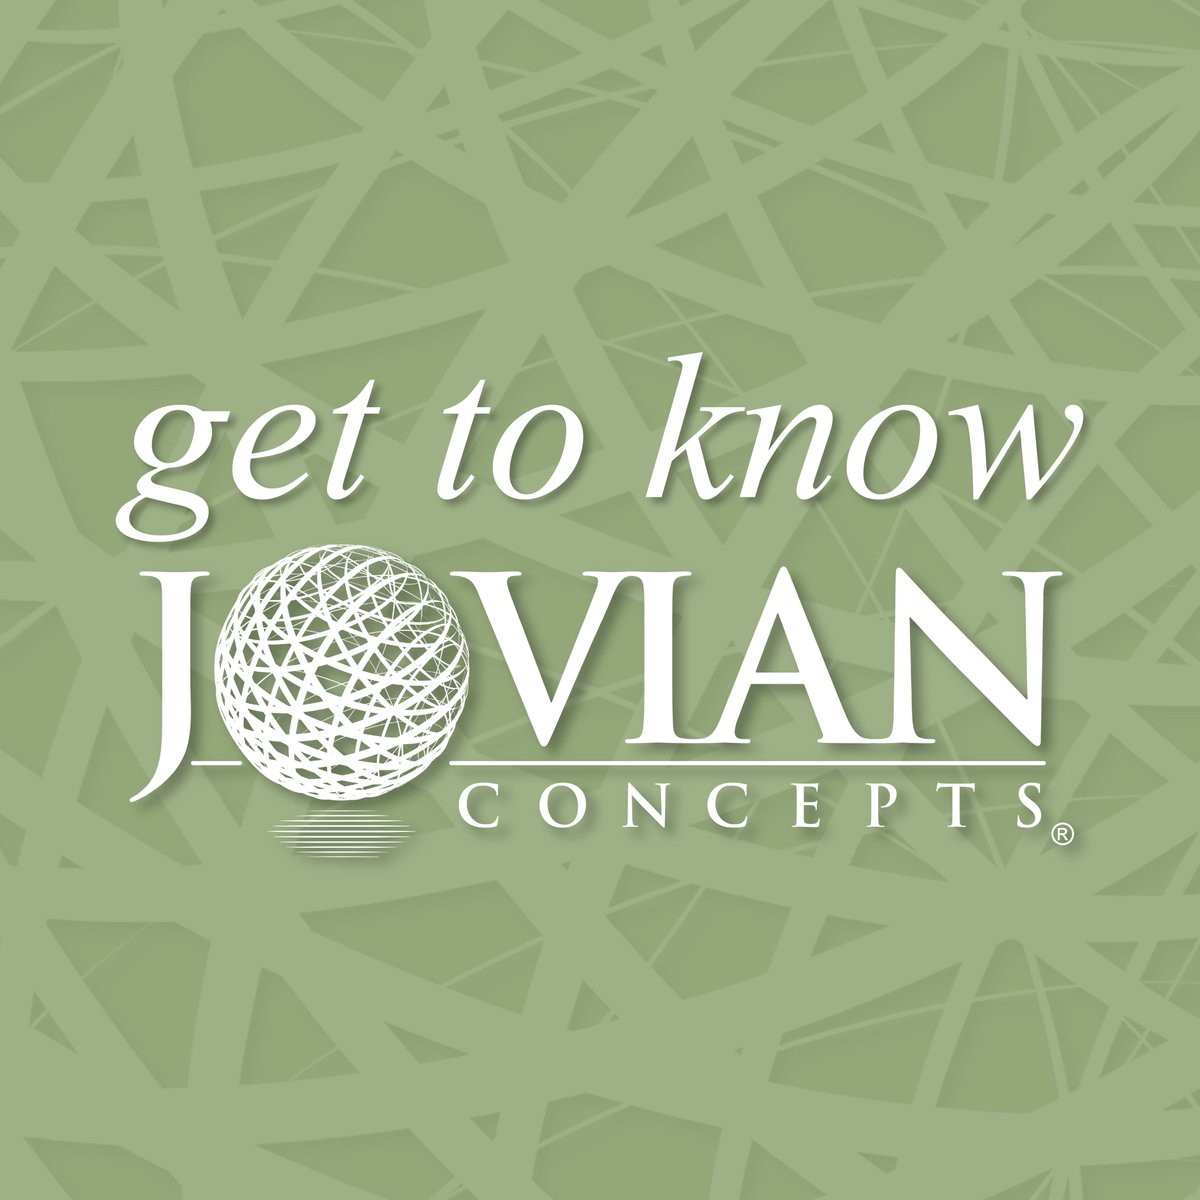 What's the Big Idea about Jovian Concepts? Visit our site to learn what makes Jovian Concepts a #TopWorkplace. From our benefits to our events, we've got something for everyone. #GettoknowJovianConcepts: jovianconcepts.com/news-updates #nowhiring